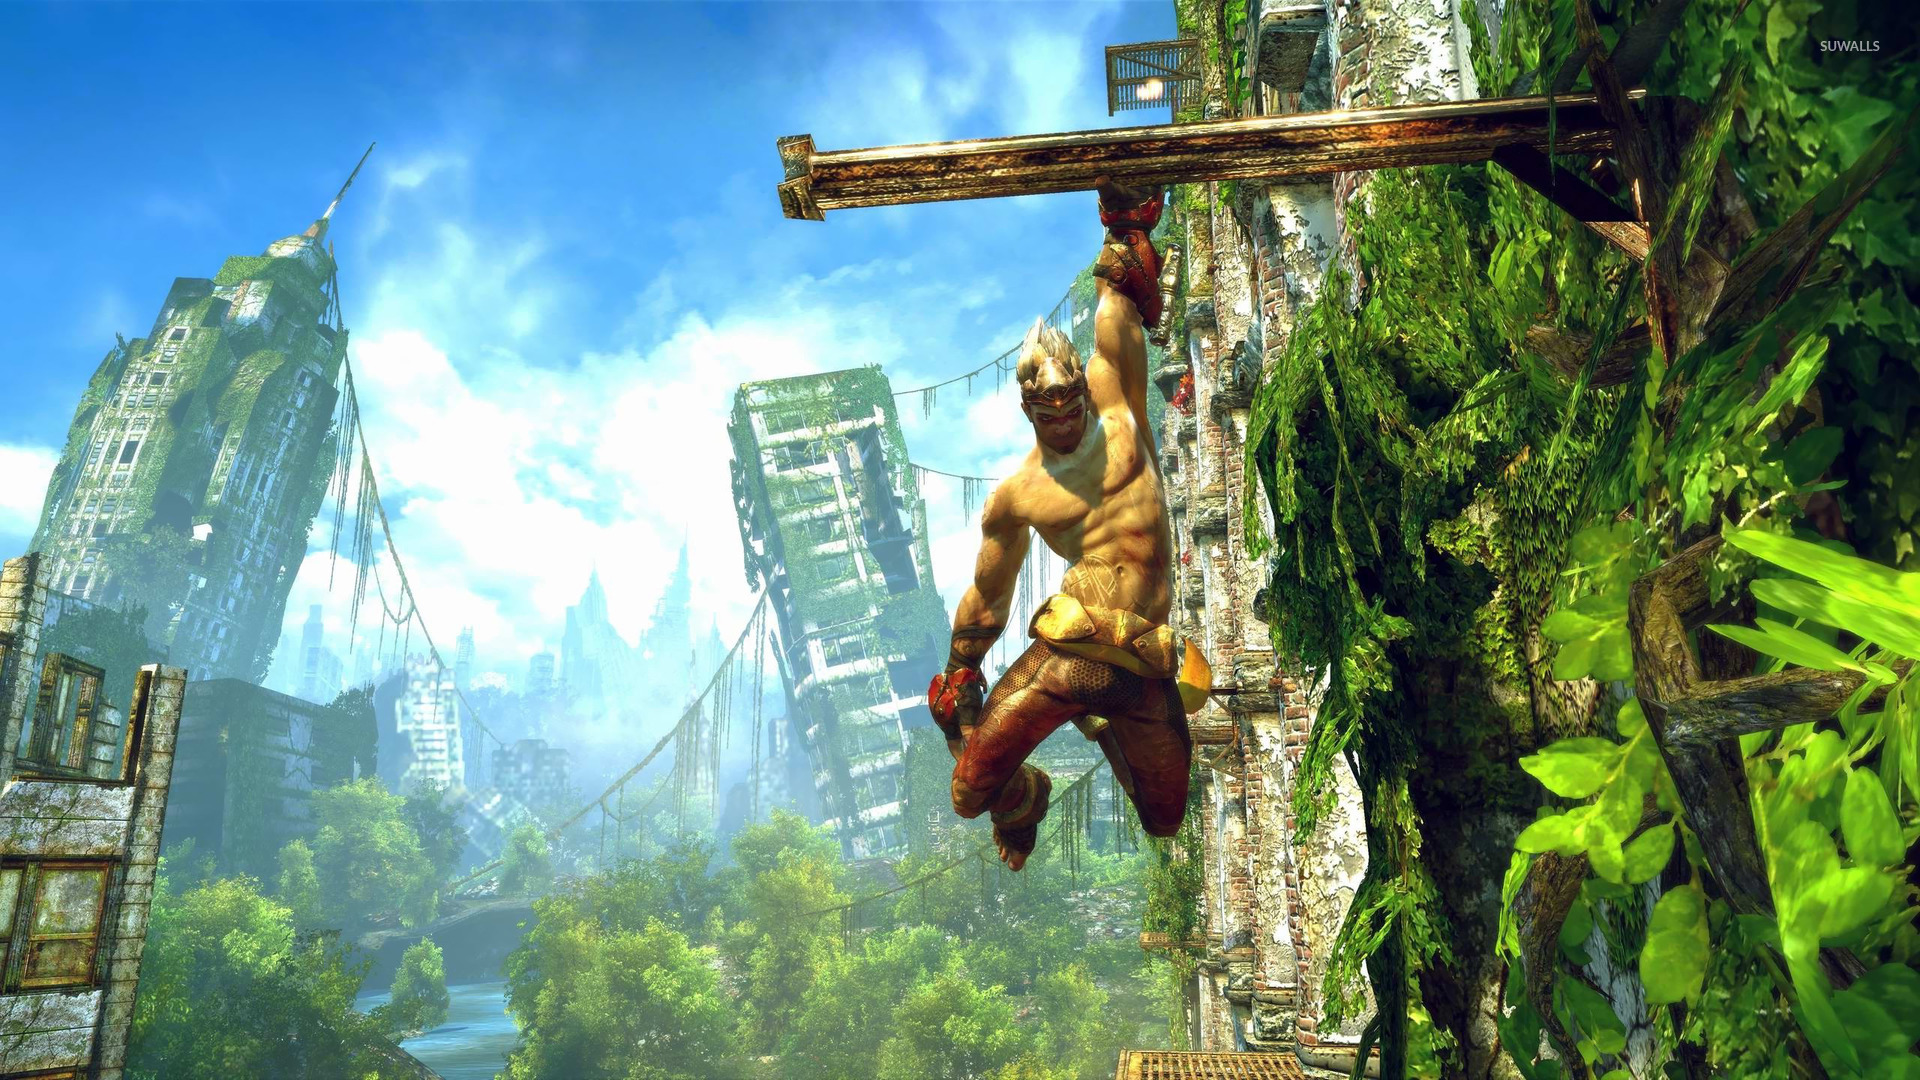 Enslaved Odyssey To The West Wallpaper Game